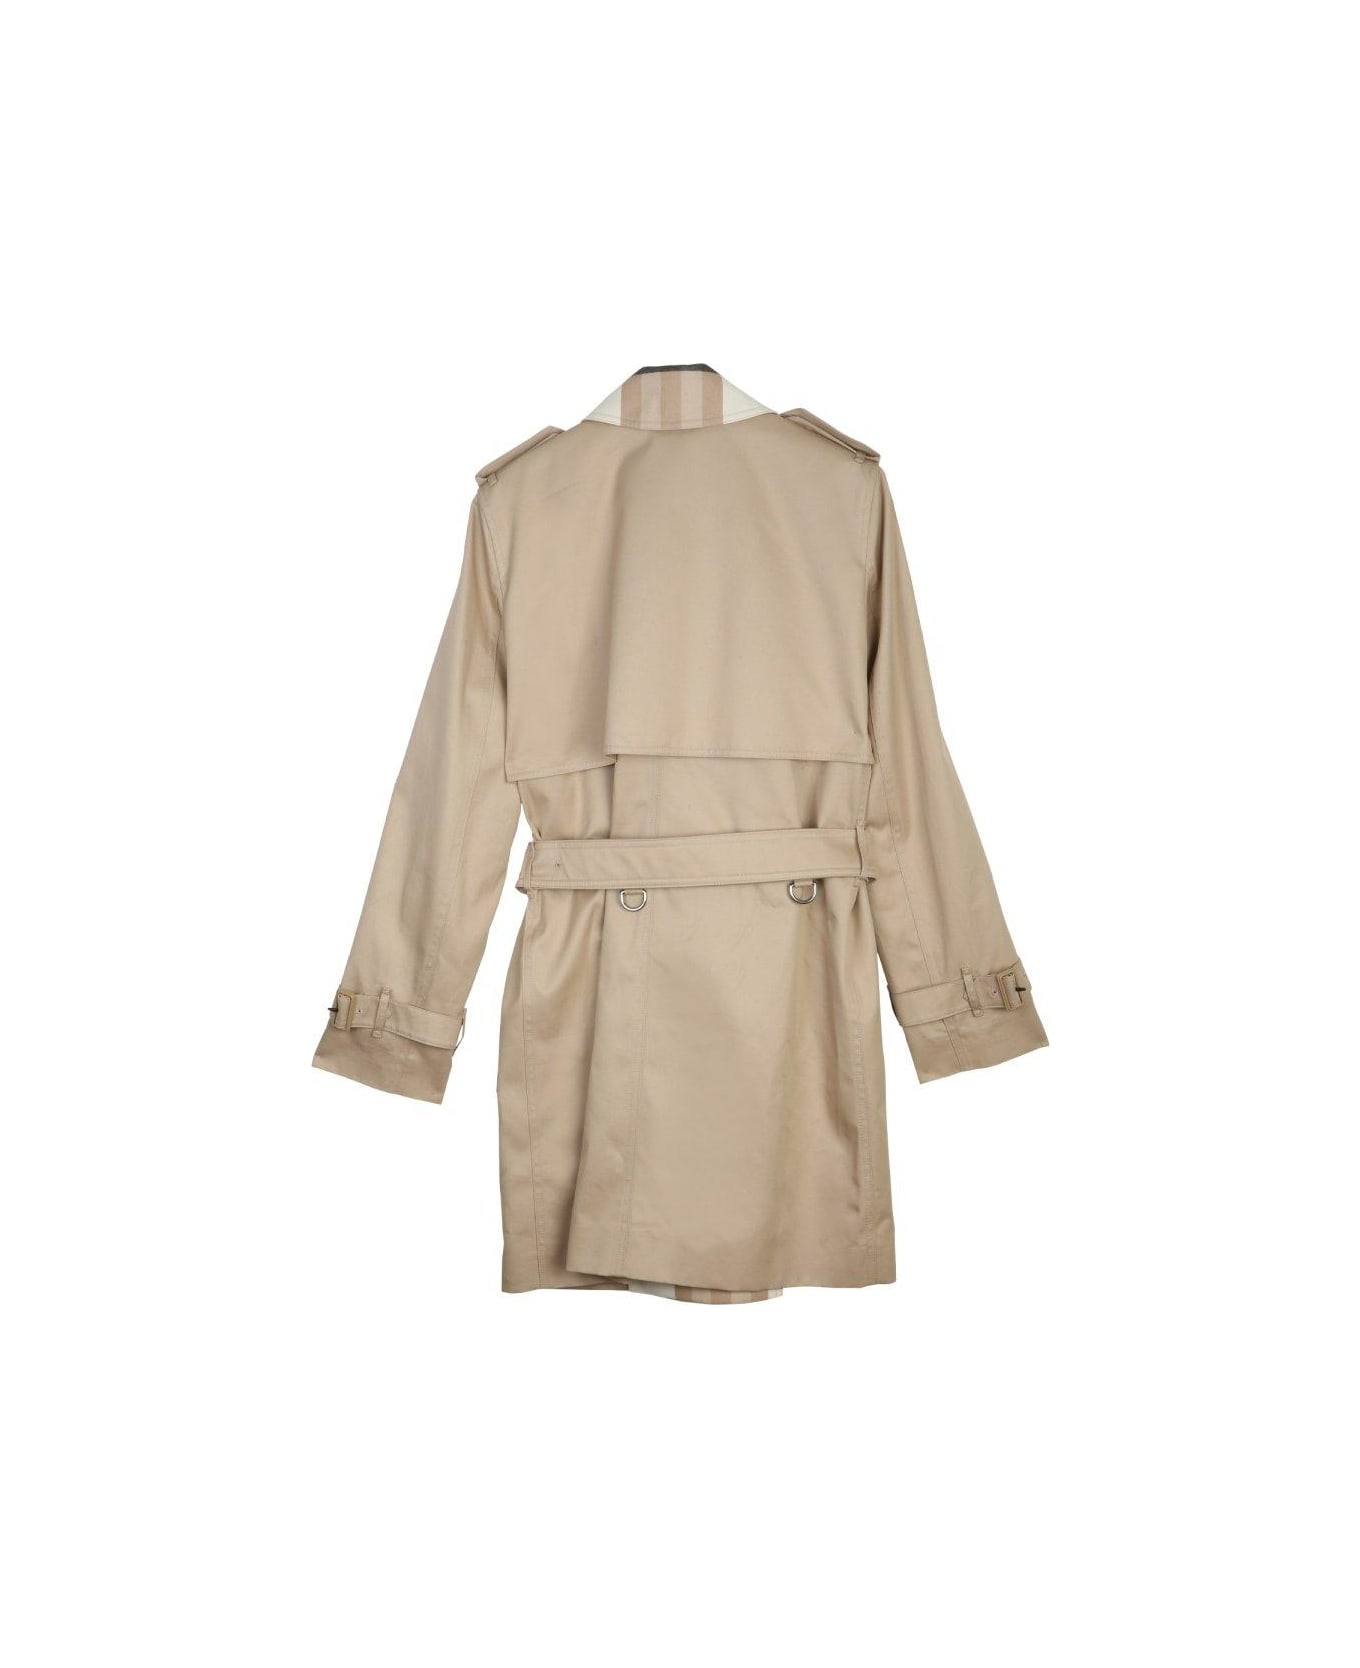 Burberry Belted Check Detailed Trench Coat - BEIGE レインコート